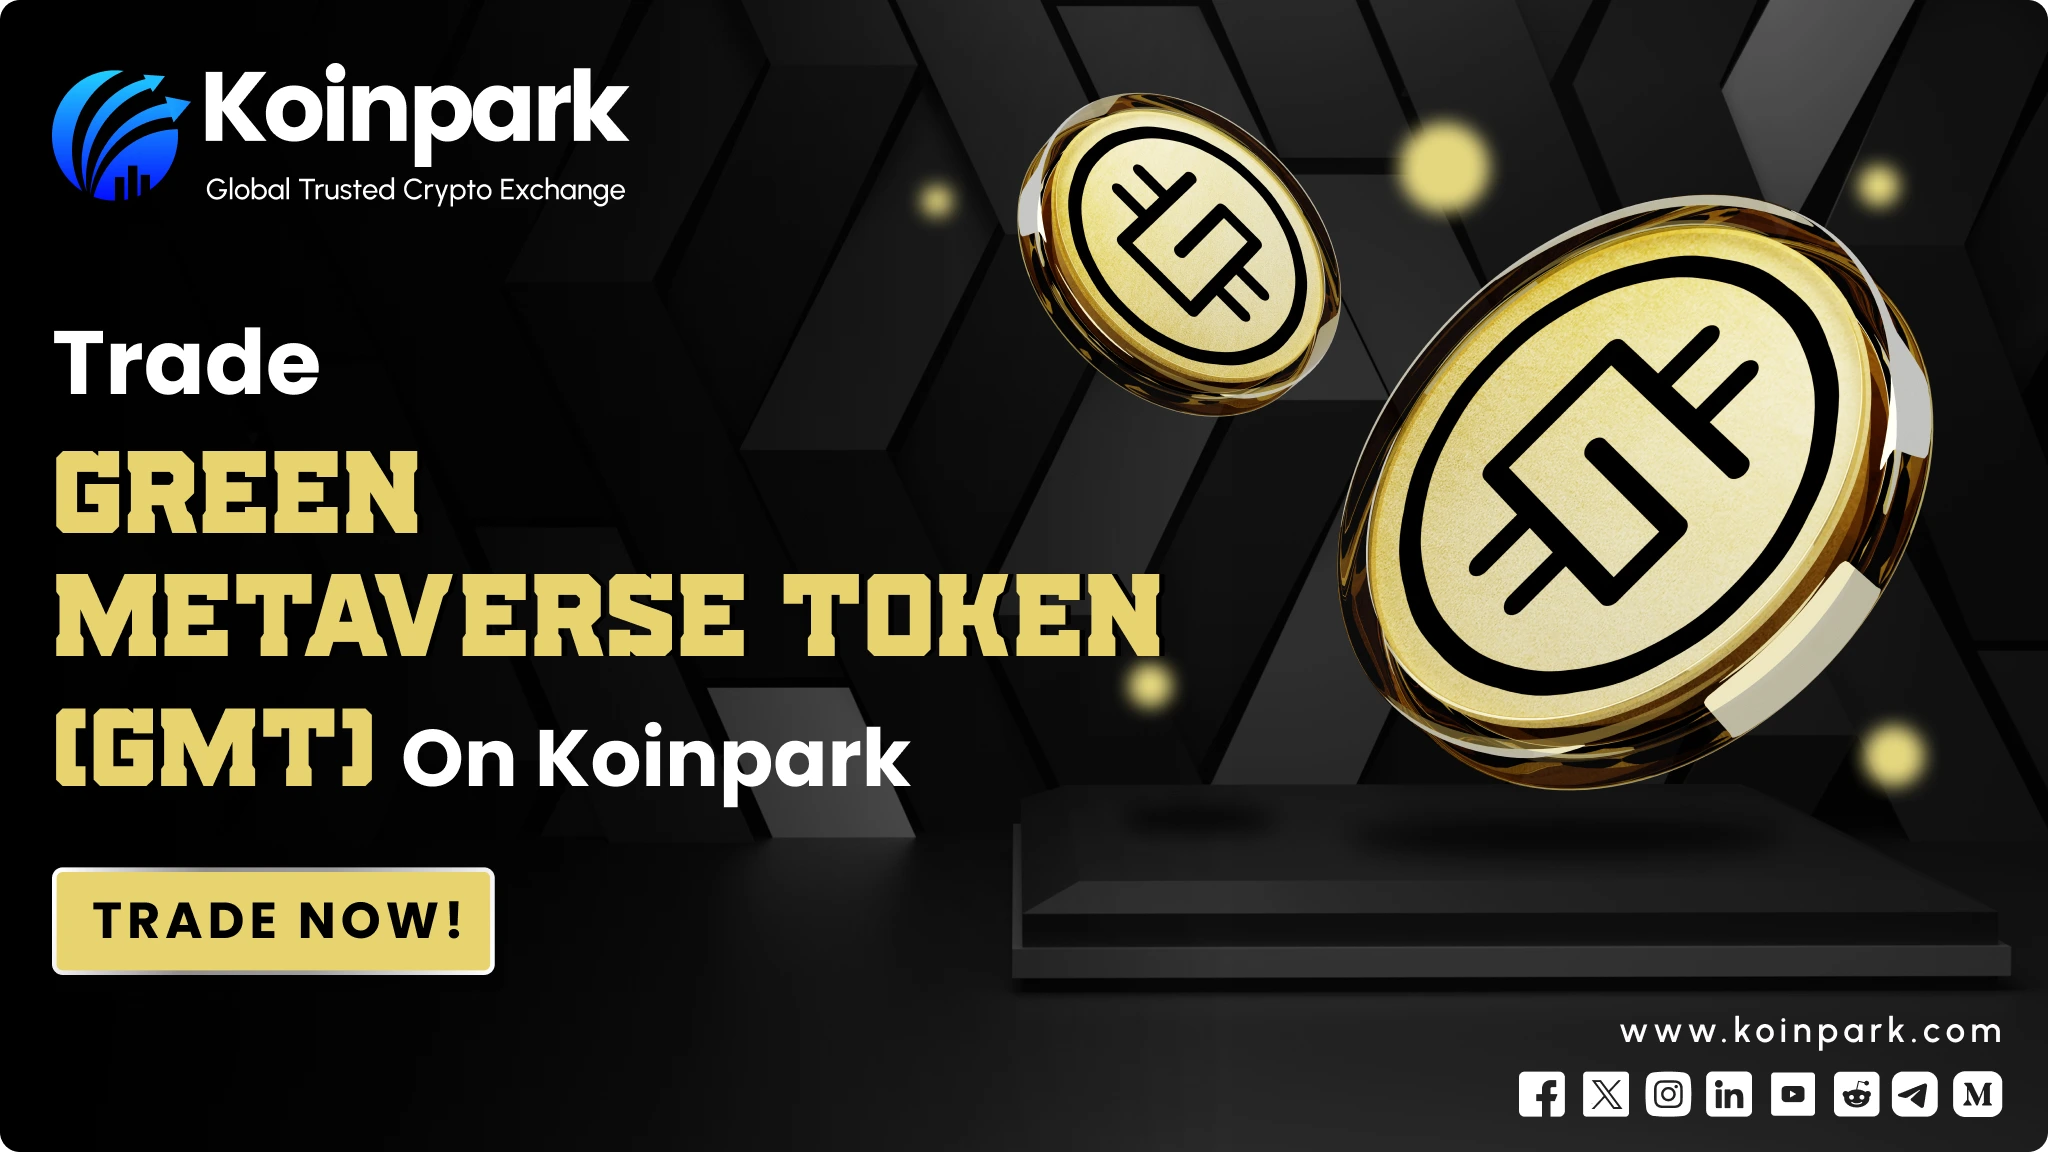 Green Metaverse Token (GMT) is officially listed on Koinpark!